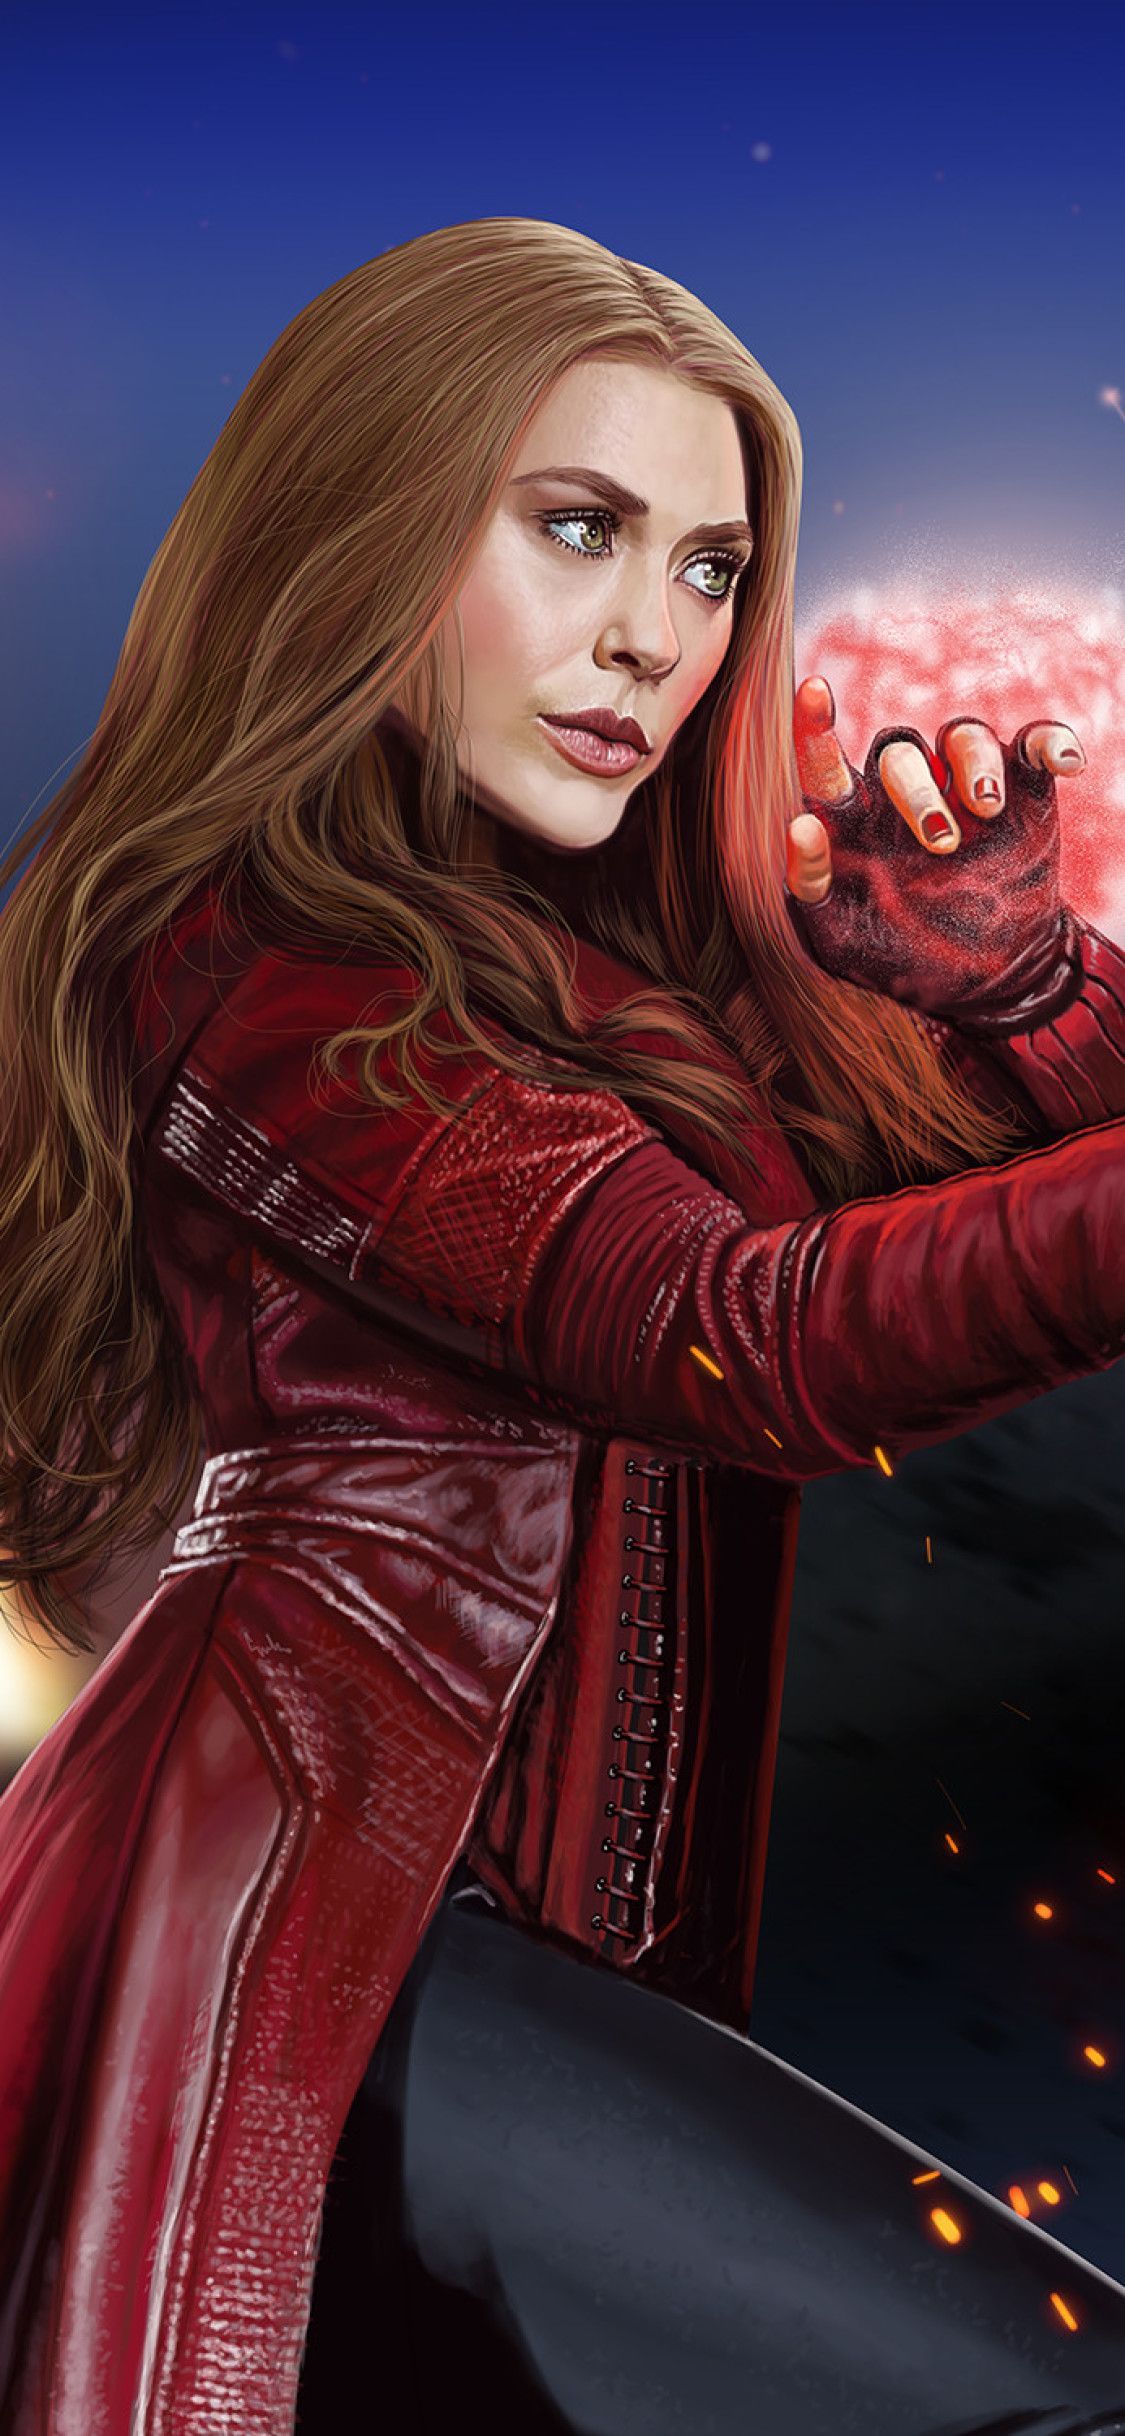 Scarlet Witch New Artwork iPhone XS, iPhone iPhone X HD 4k Wallpaper, Image, Background, Photo. Witch wallpaper, Scarlet witch, Marvel superheroes